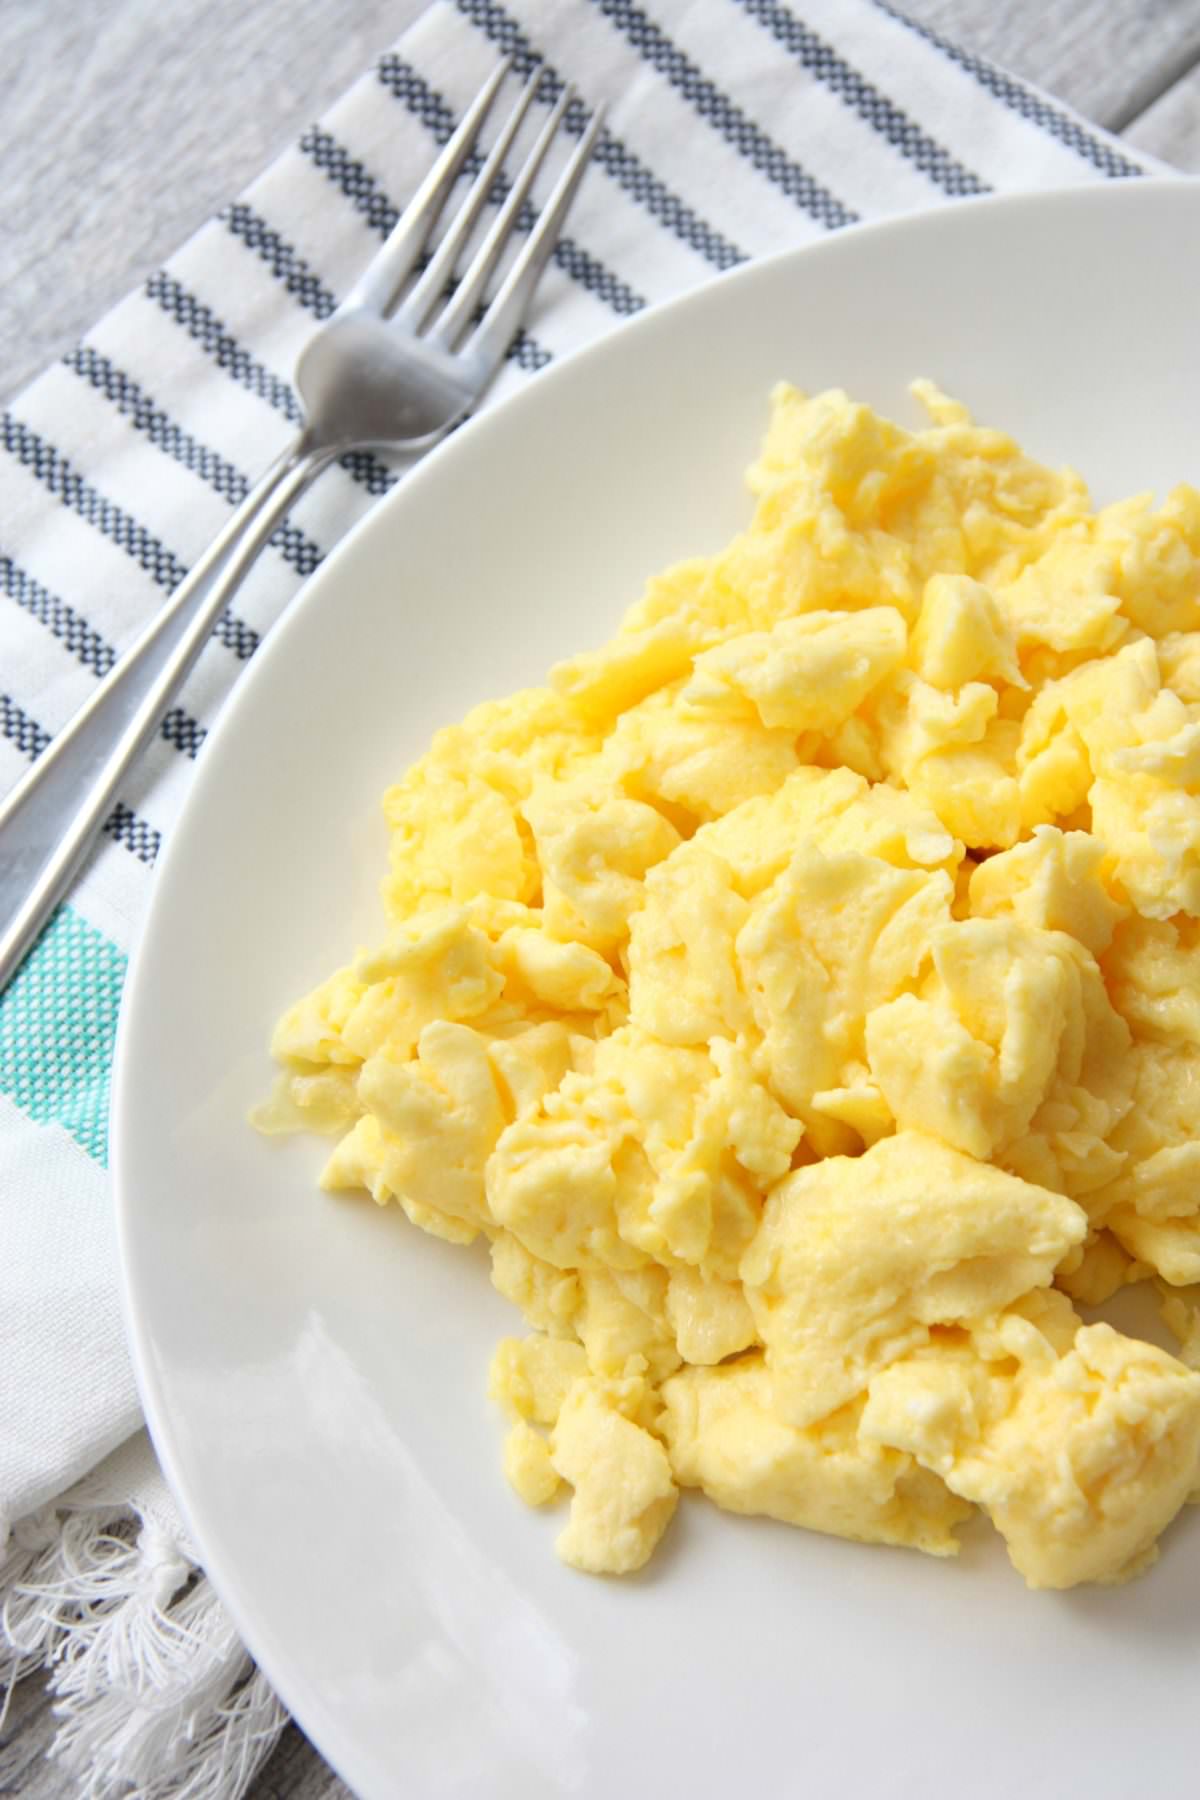 How to make perfect, fluffy scrambled eggs - My Mommy Style